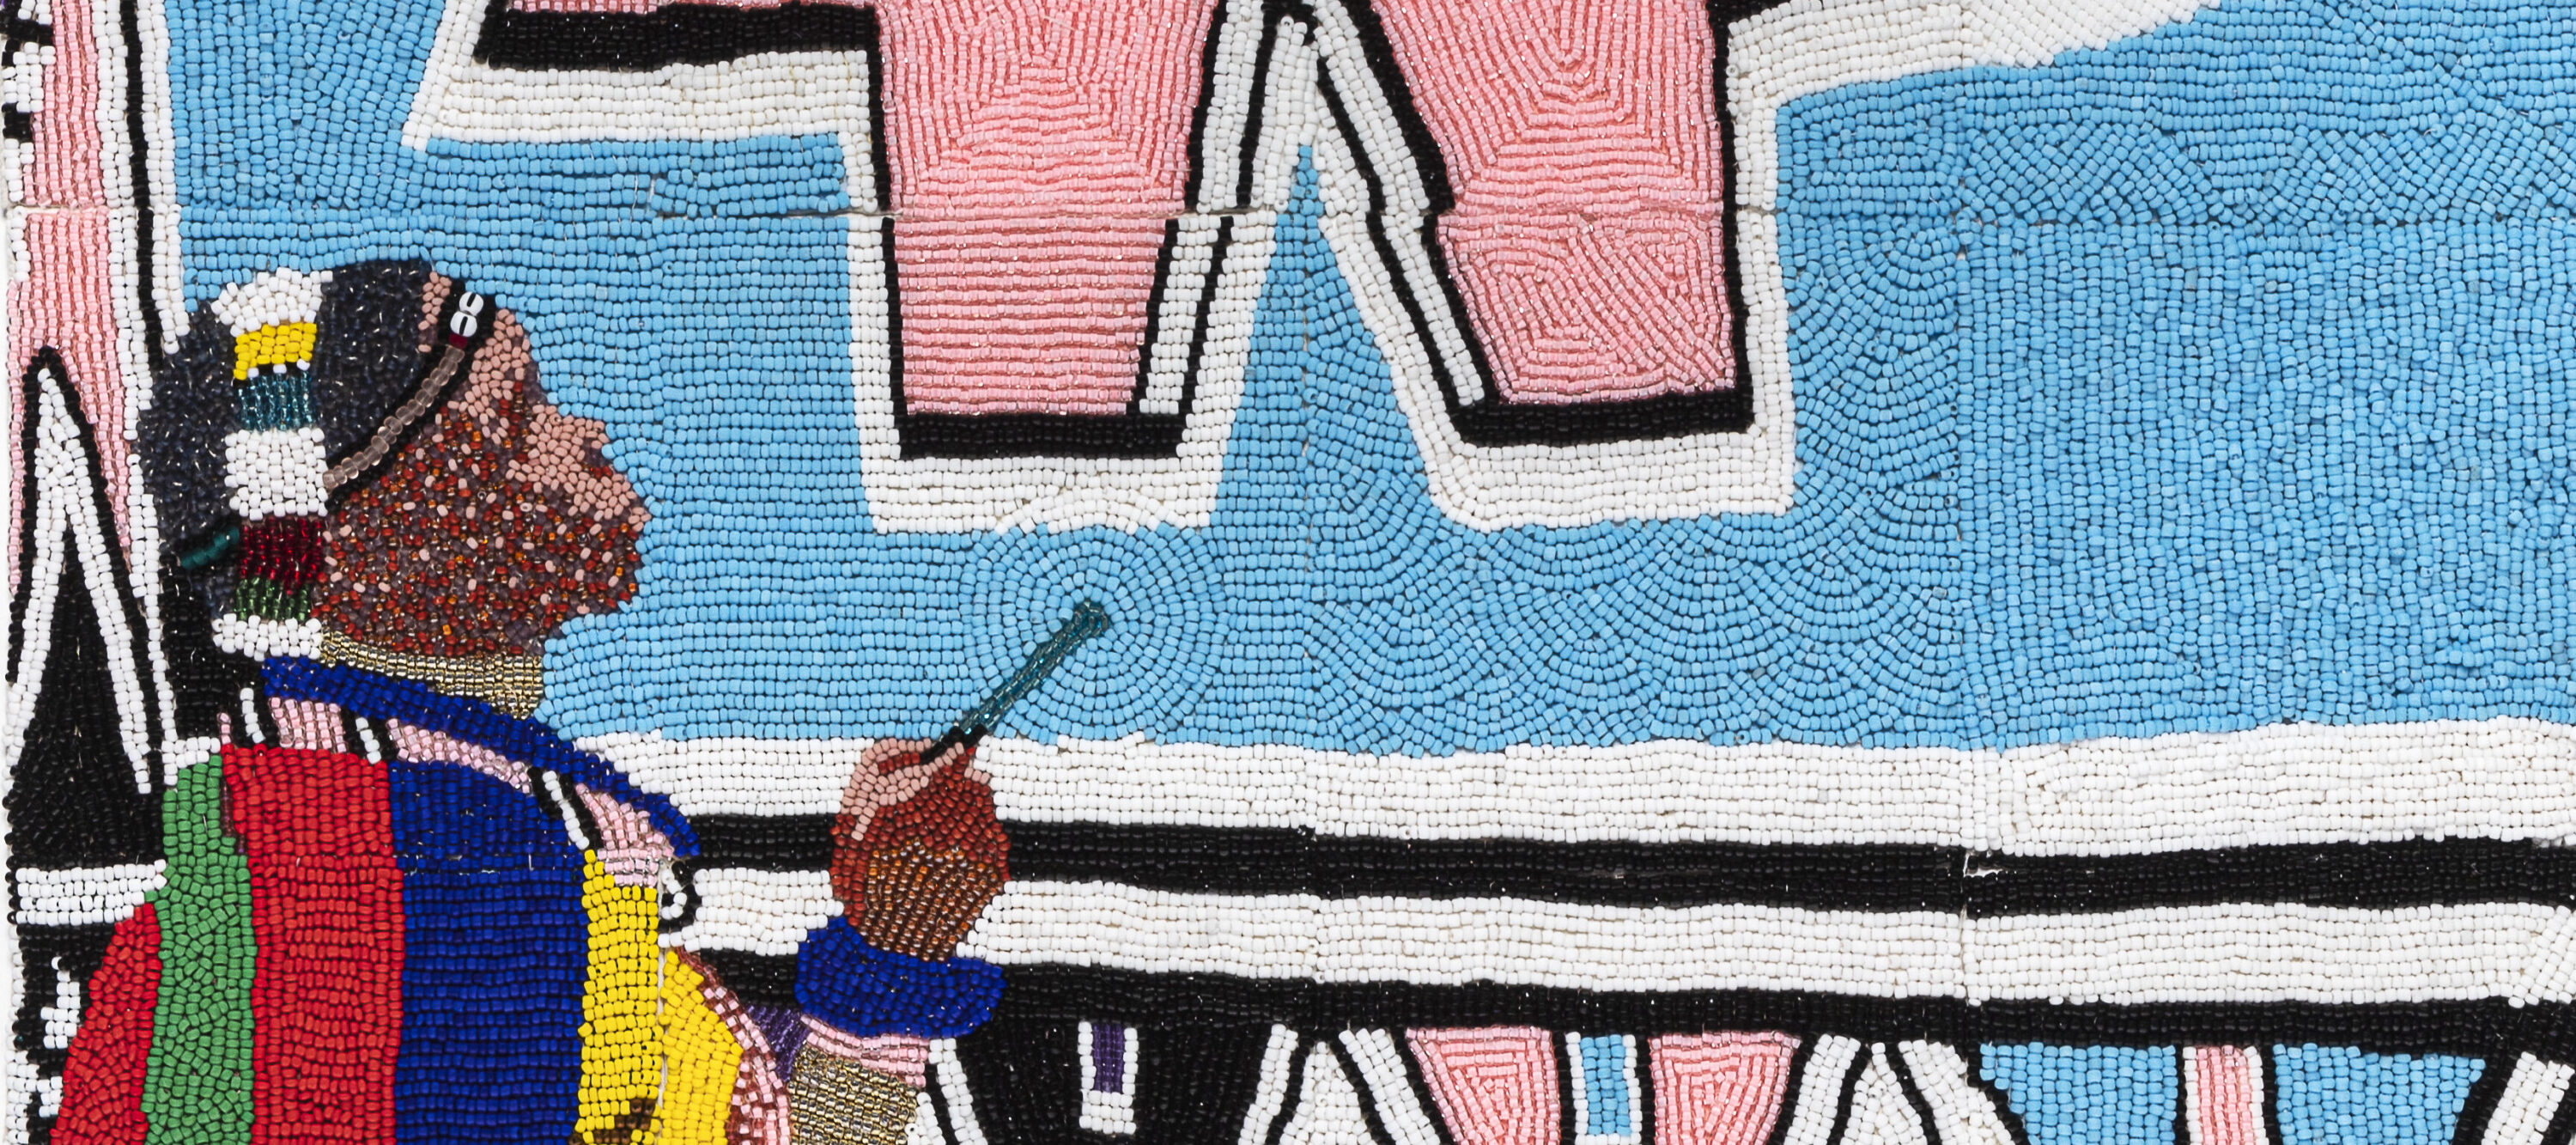 Sonya Clark, <em>Esther Mahlangu’s Touch</em>, 2015; Glass beads, 16 x 16 in.; NMWA, Museum purchase: Members’ Acquisition Fund and Belinda de Gaudemar Acquisition Fund; © Sonya Clark; Photo by Taylor Dabney”>

										<figcaption id=